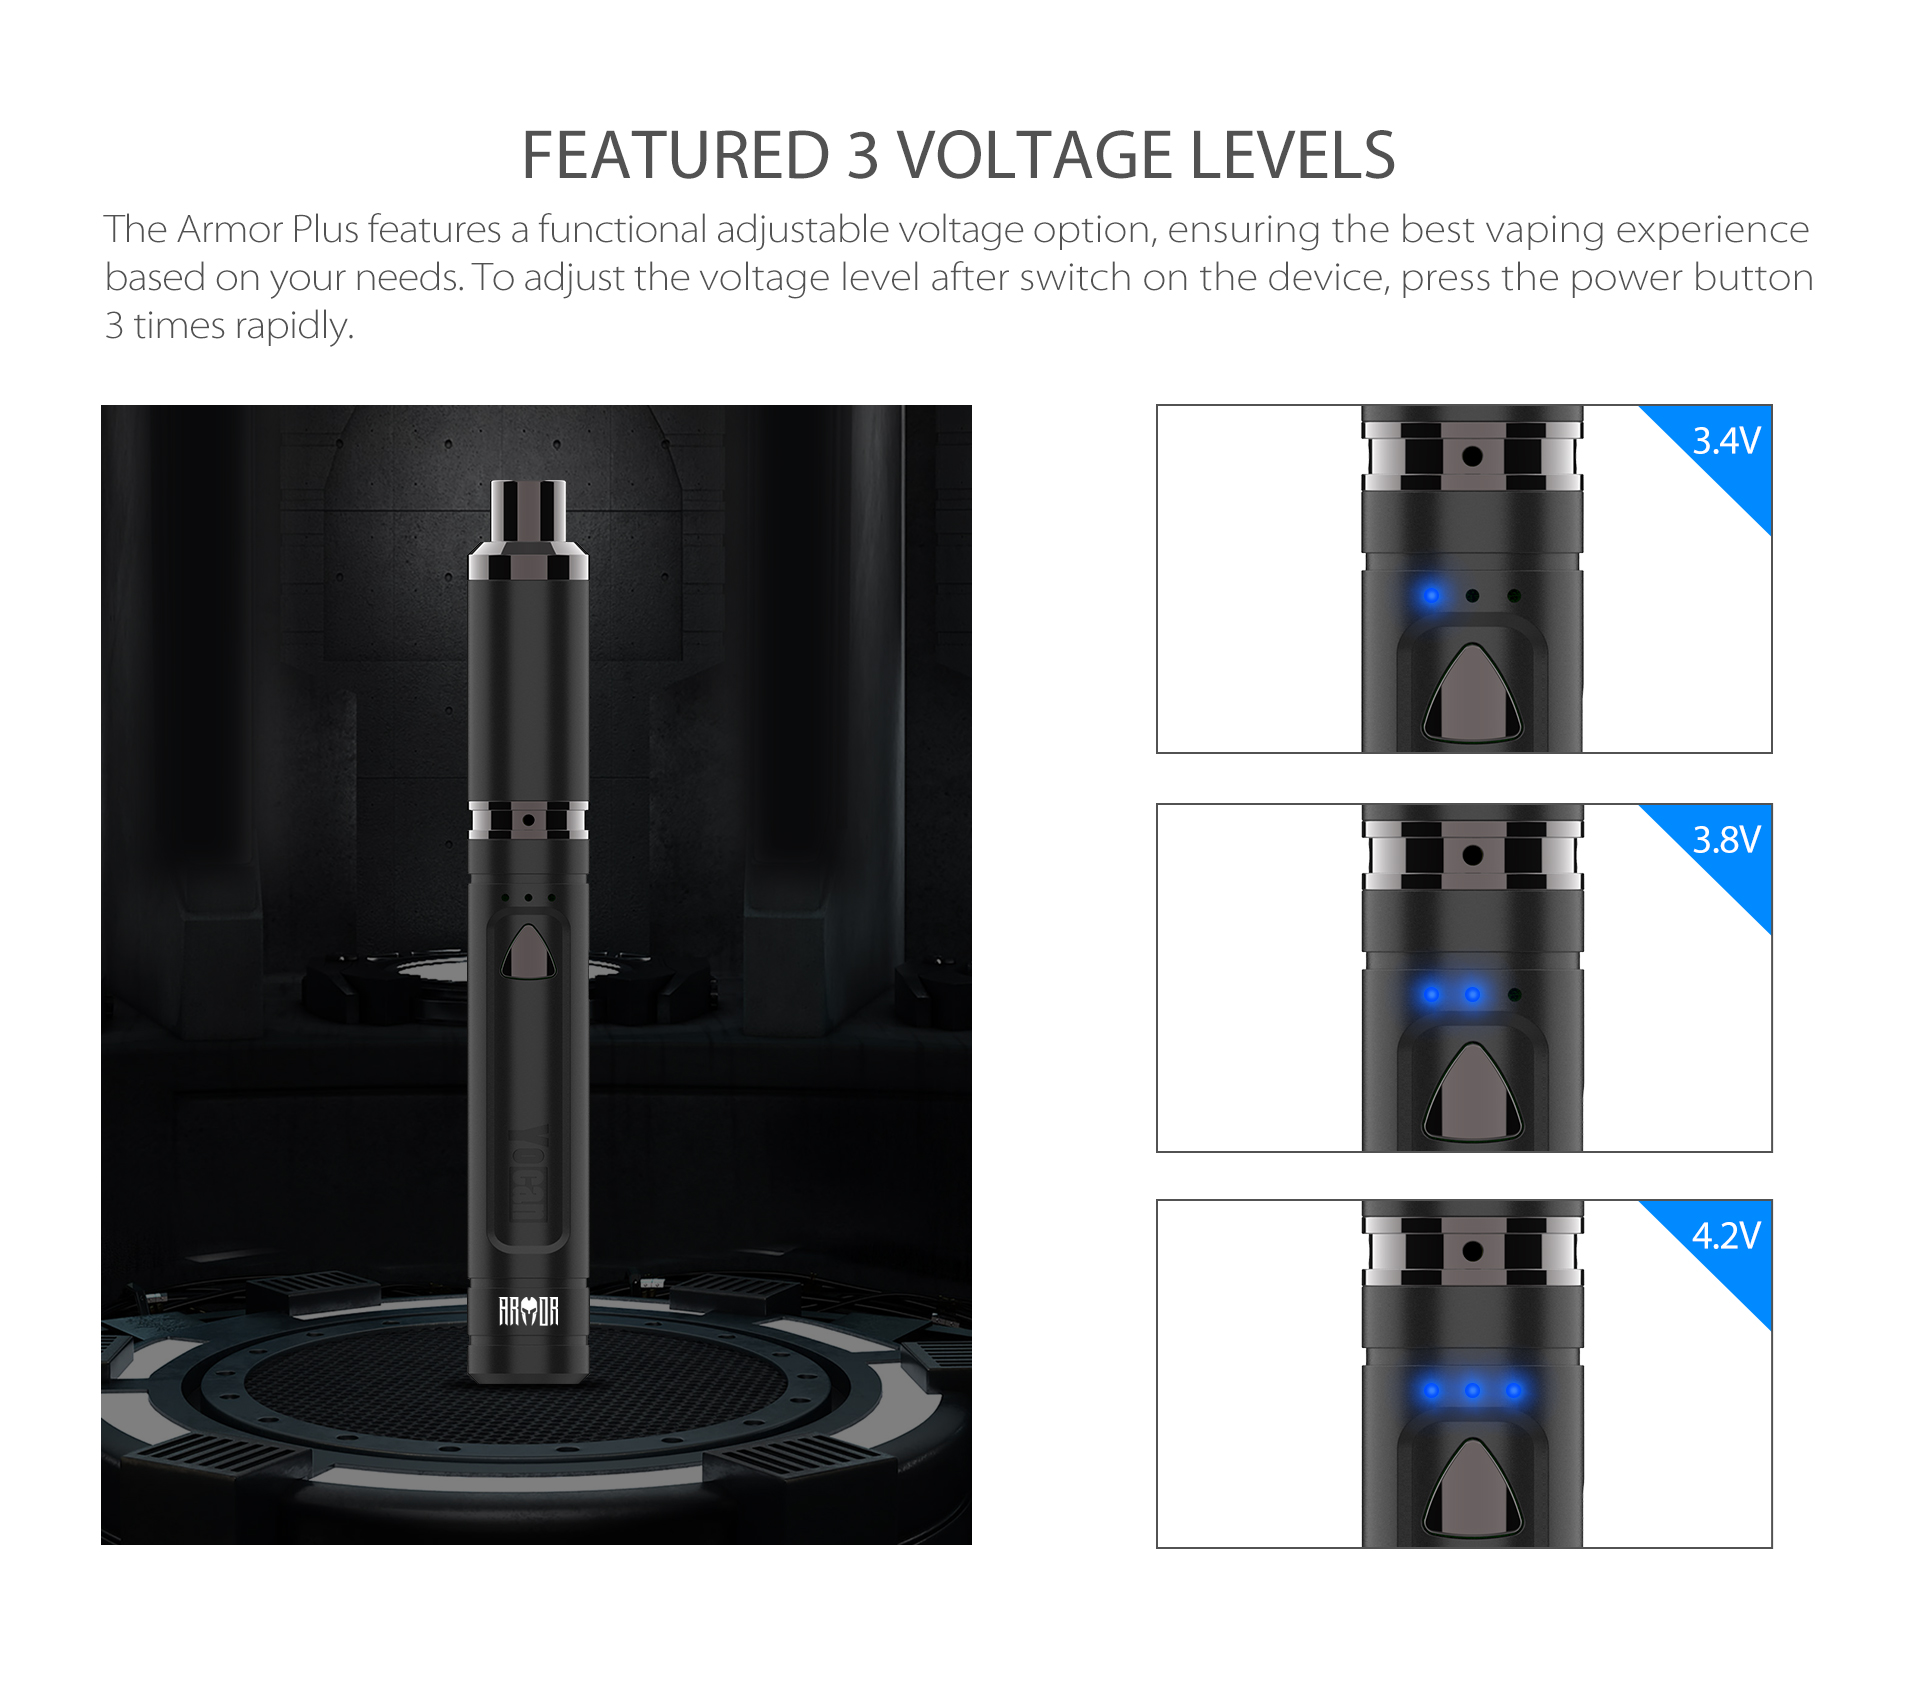 The Armor Plus features the functional adjustable voltage option